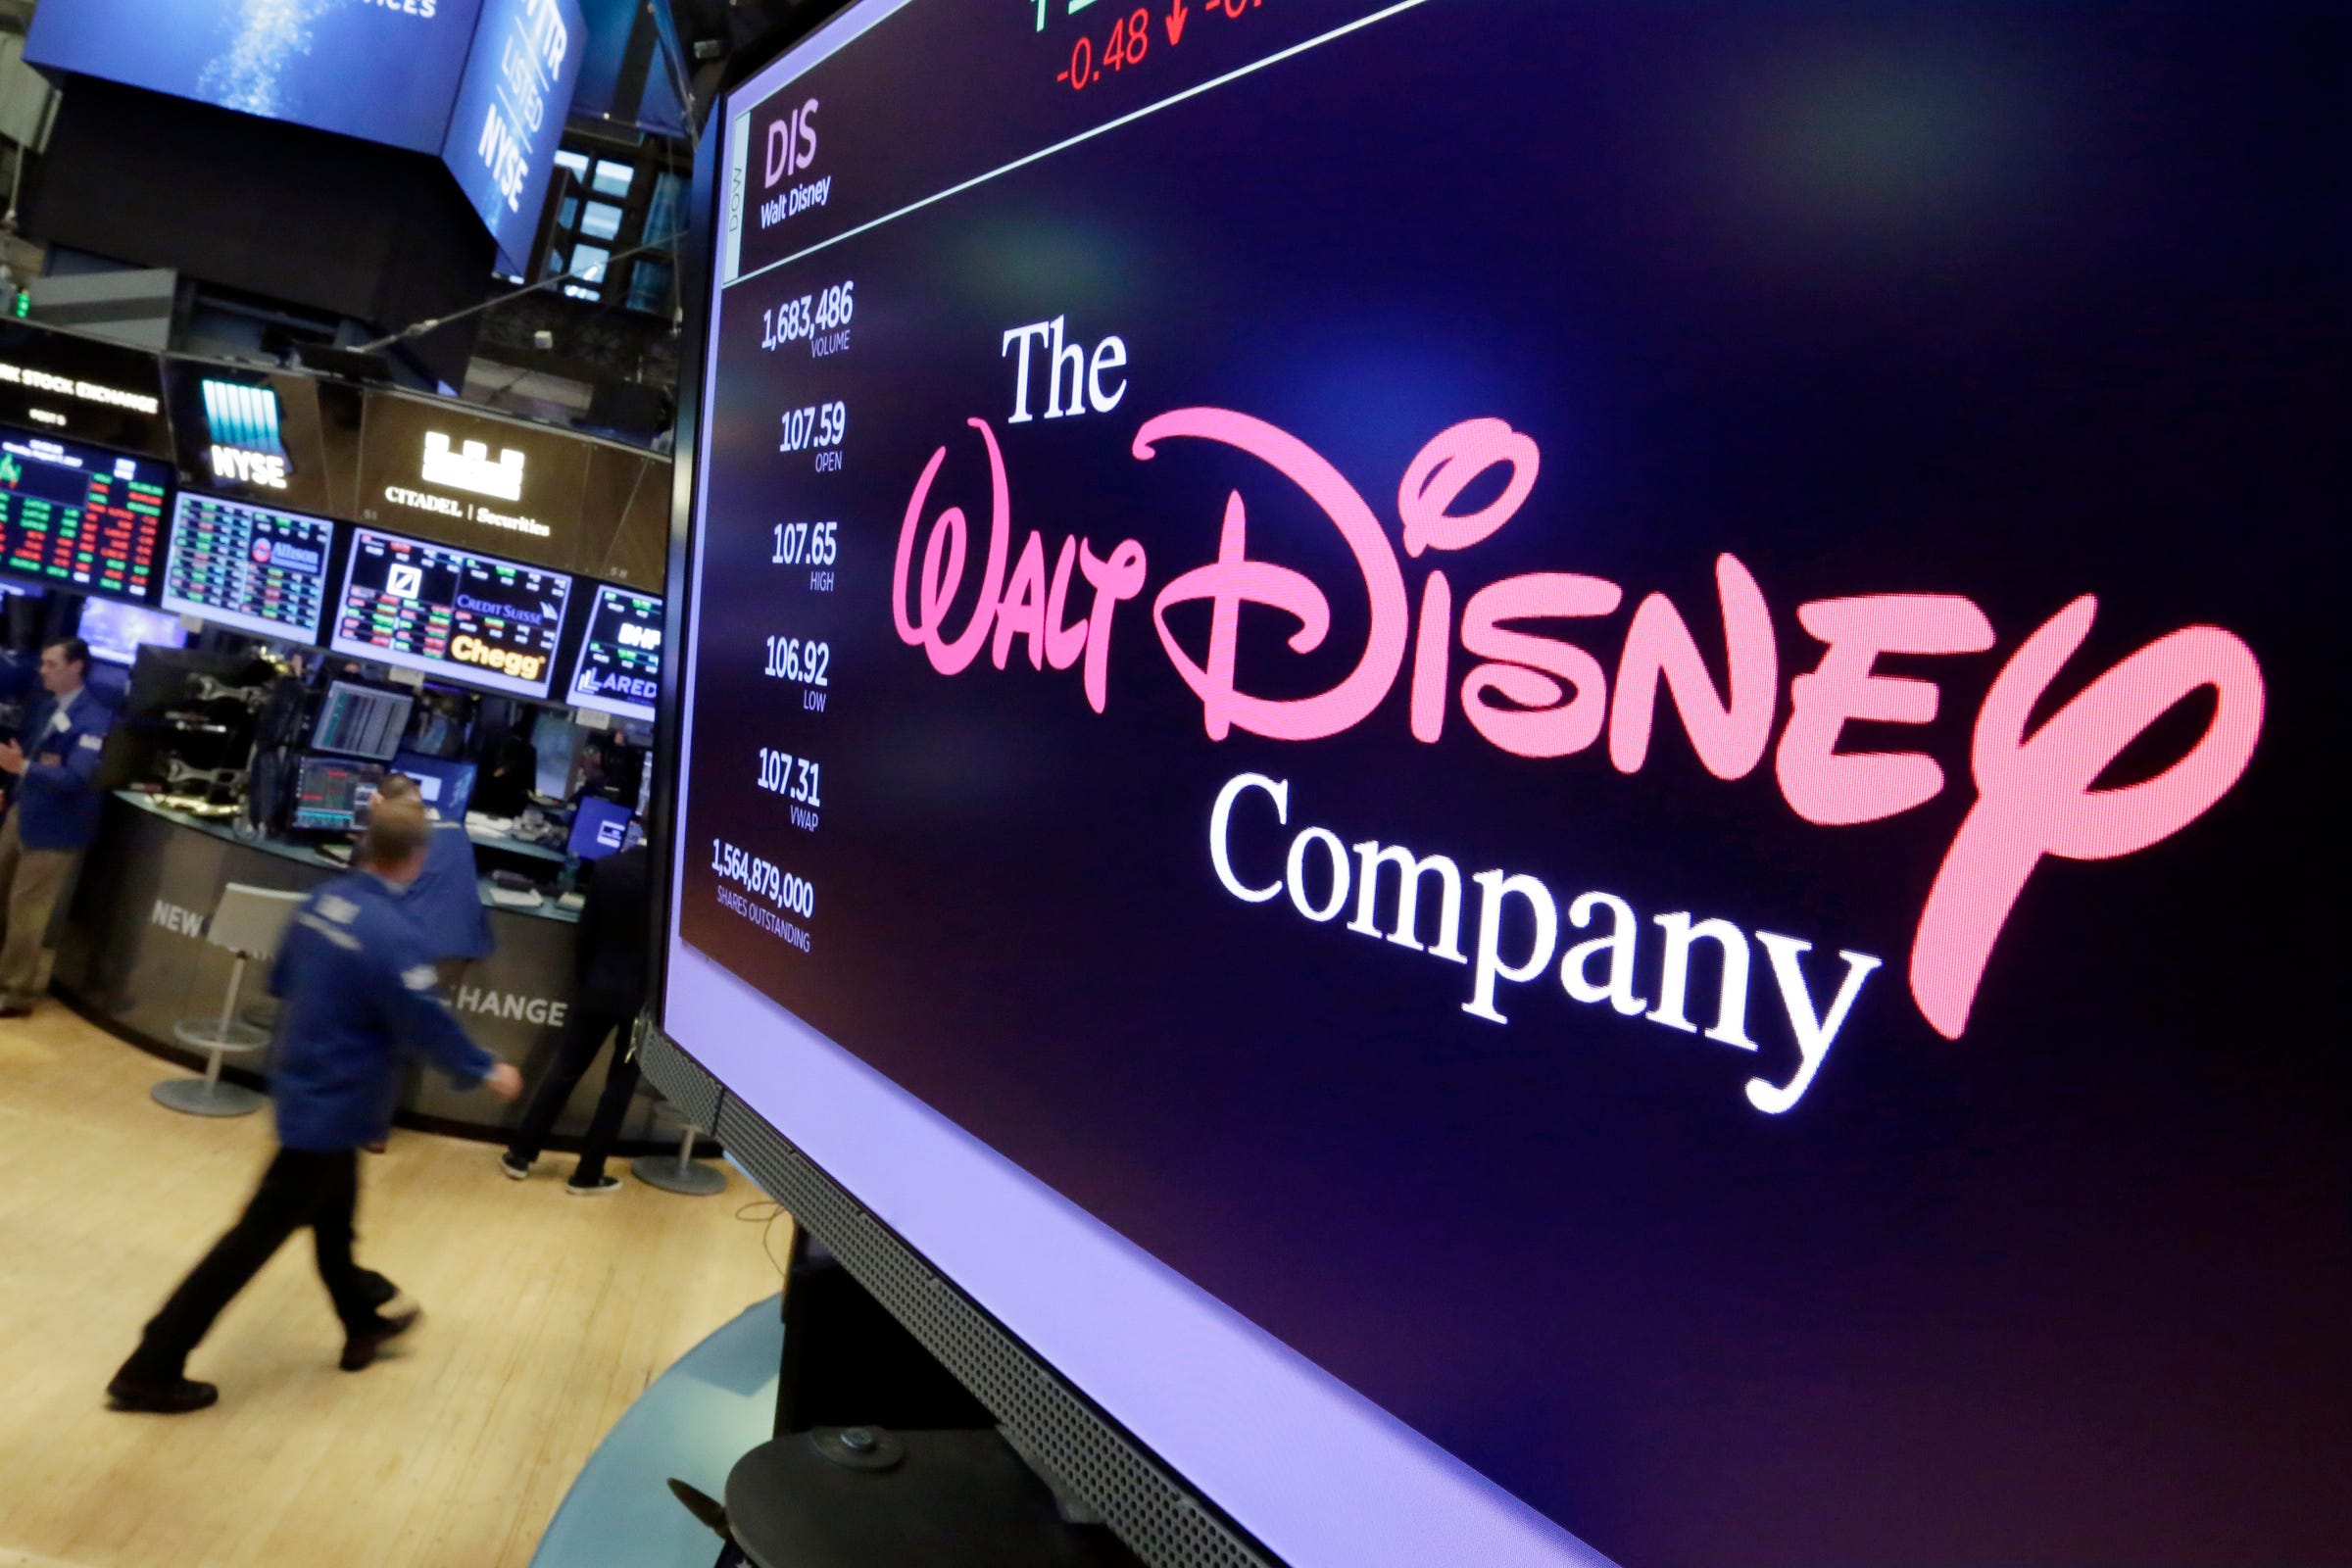 What to Expect From Walt Disney (DIS) Earnings Reports?